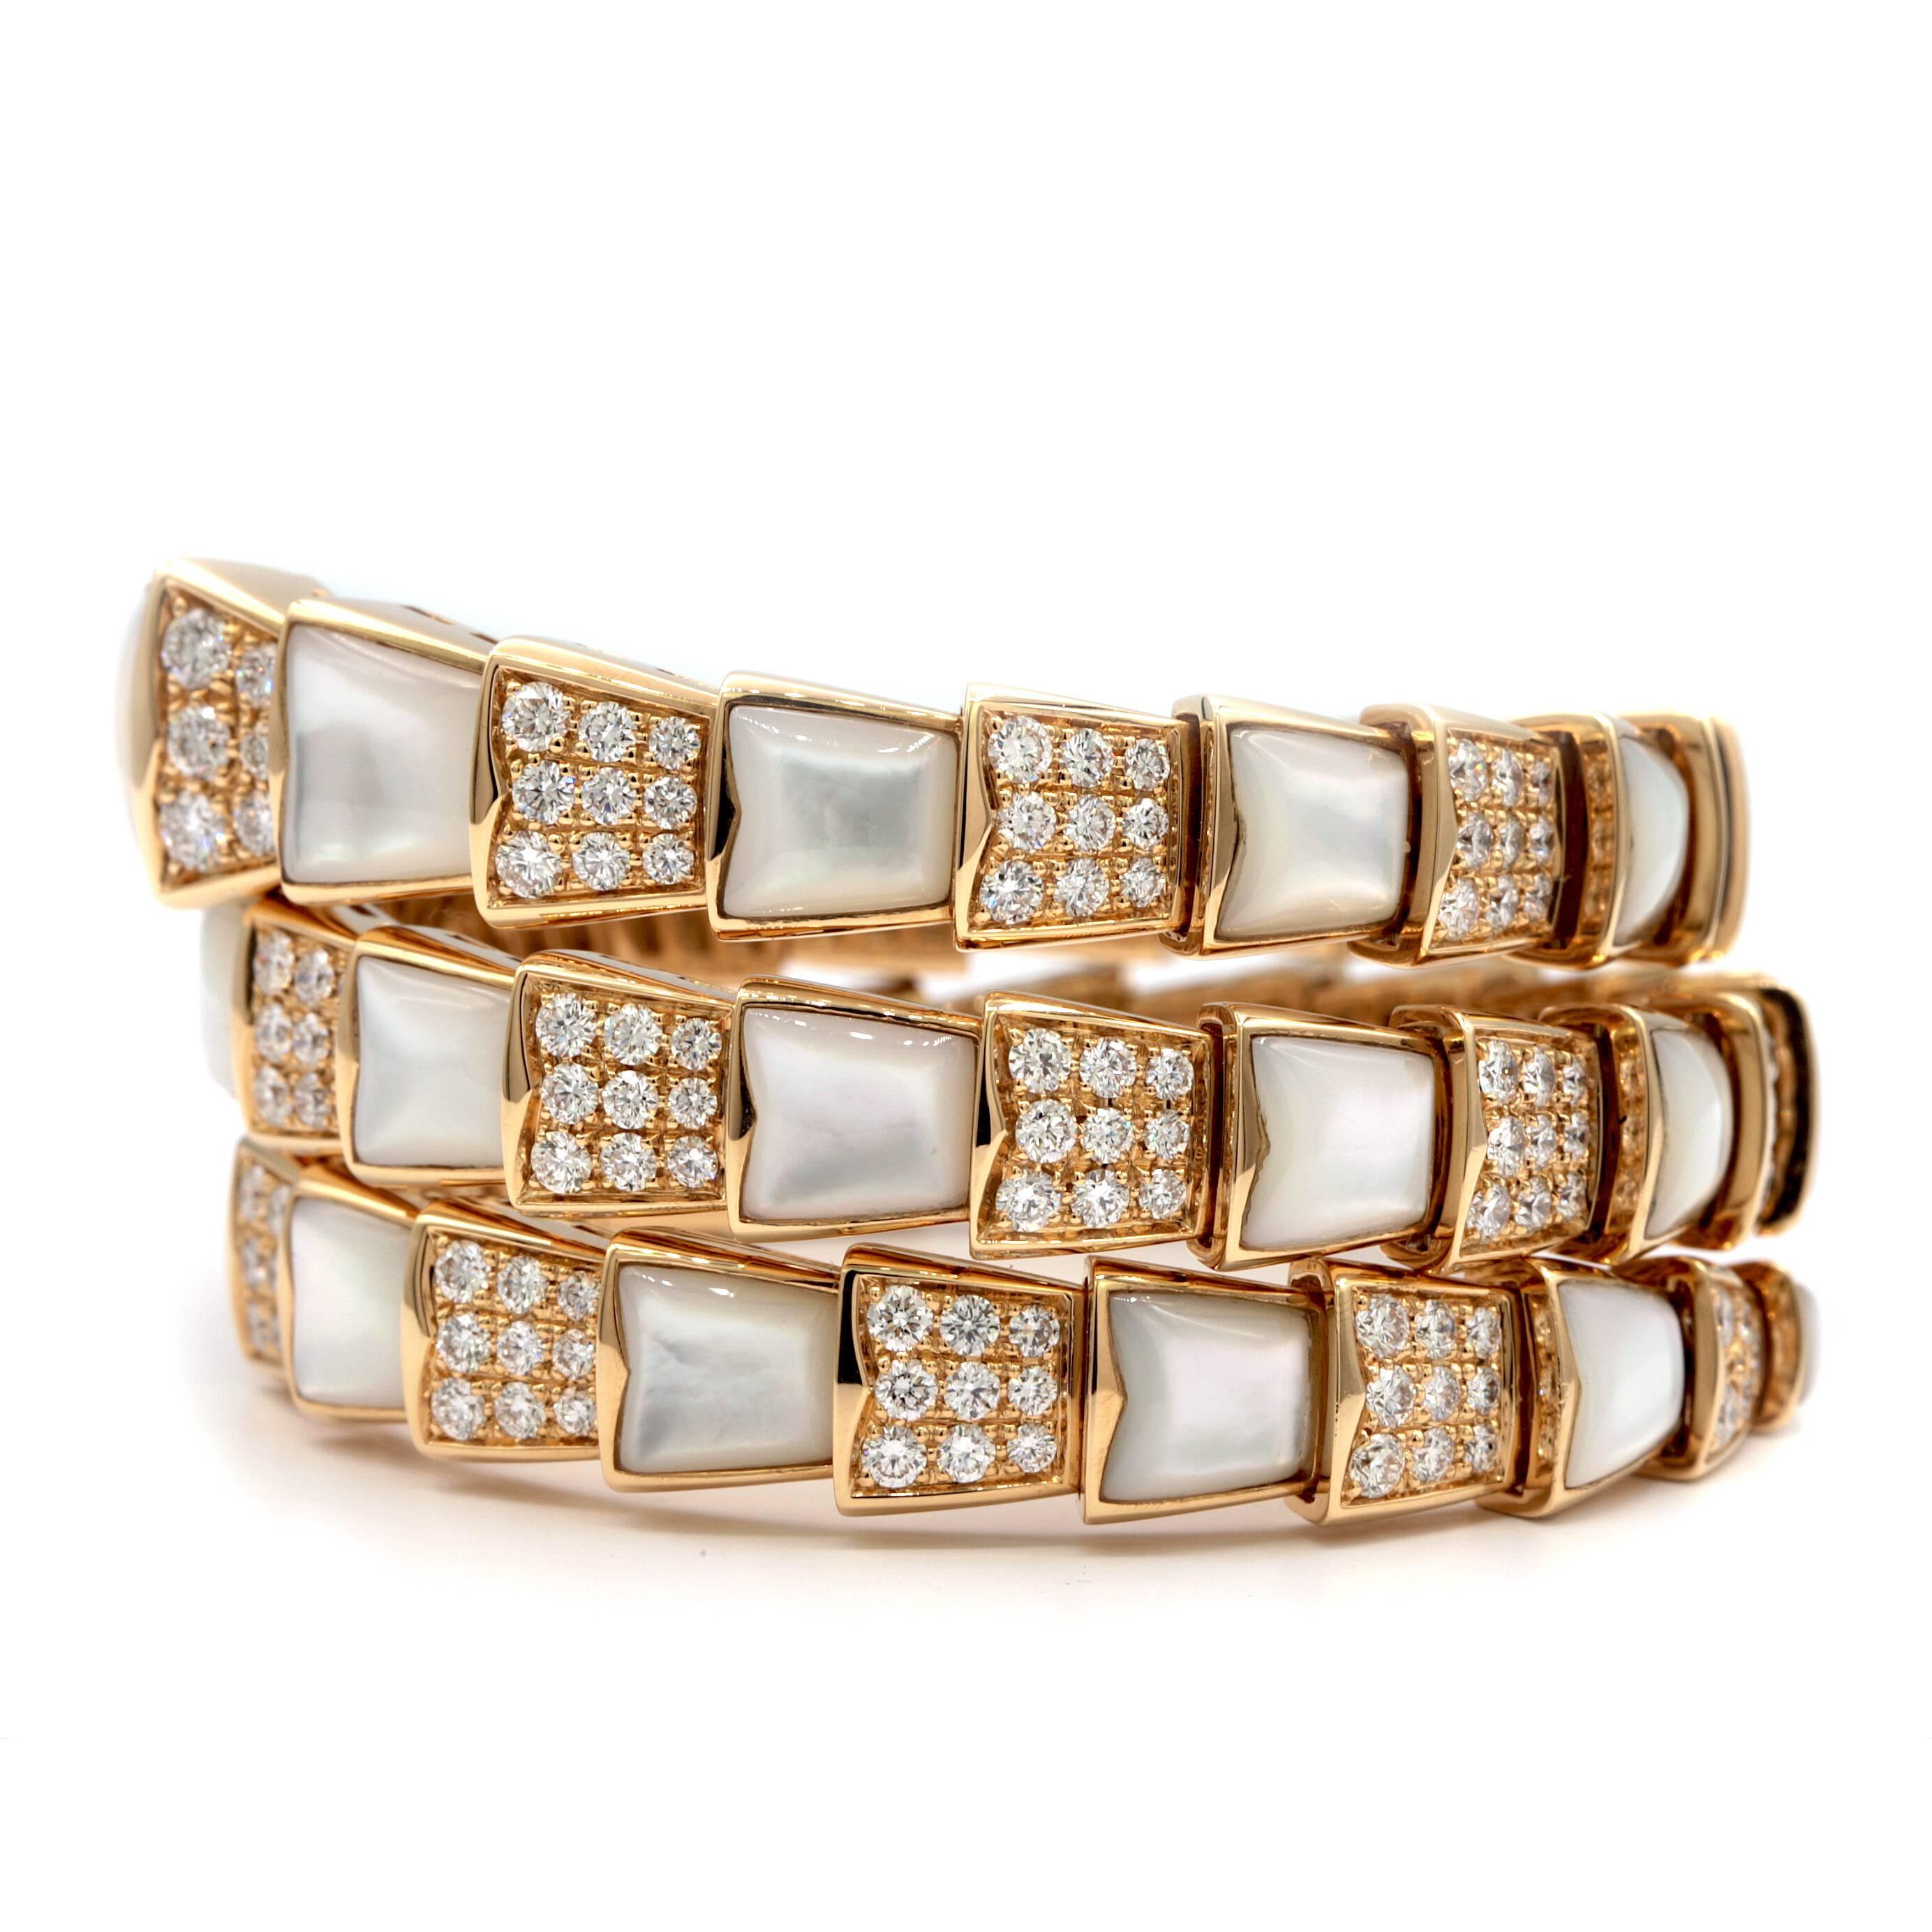 Modern Bvlgari Serpenti one-coil 18K with Pave Diamonds and Mother of Pearl Bracelet